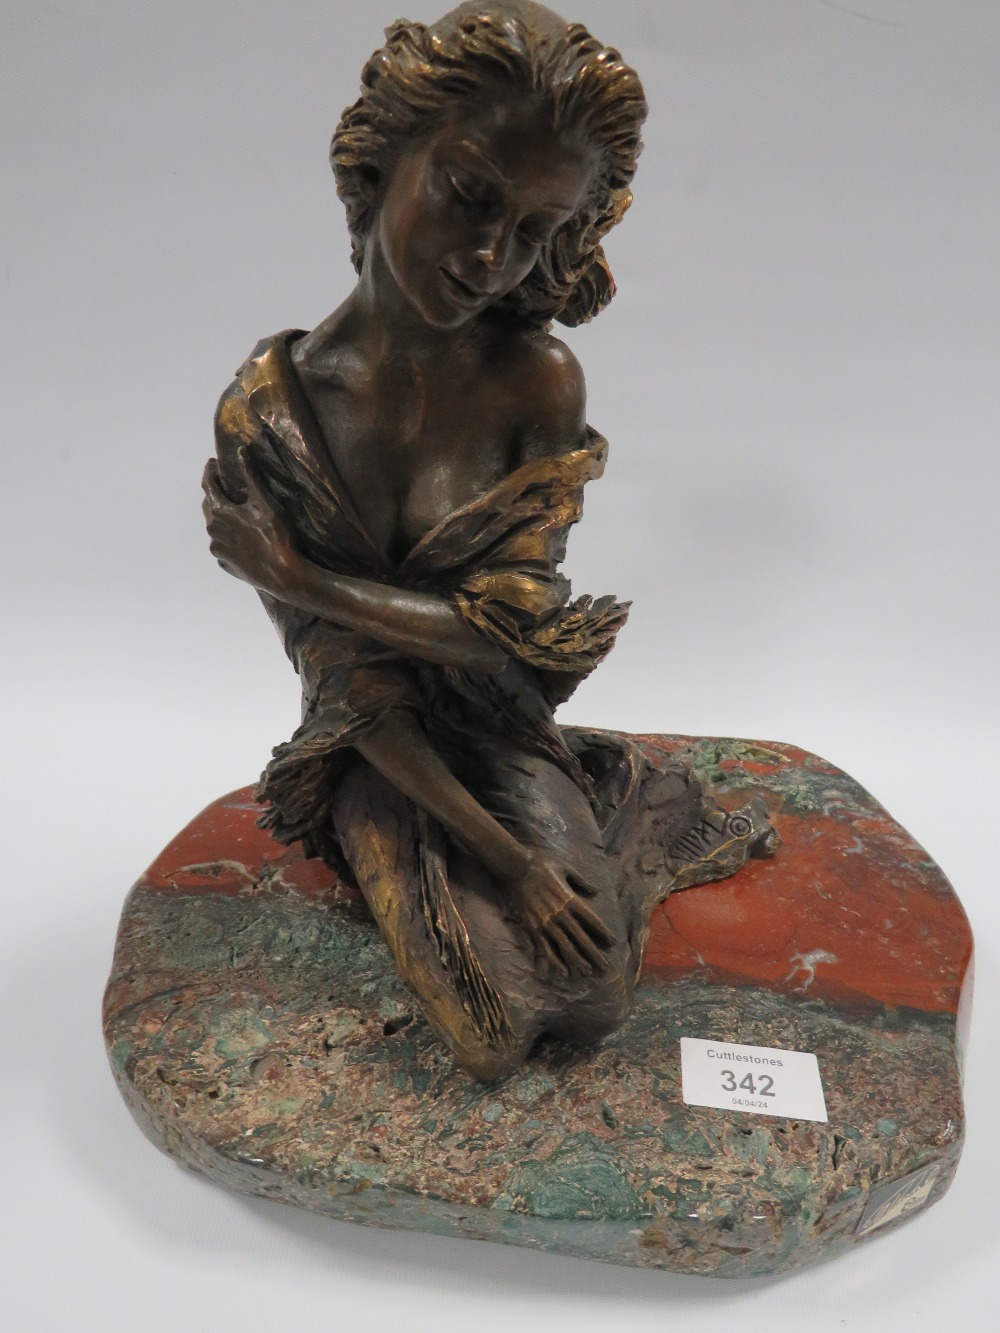 AN EBANO BRONZED SCULPTURE FROM THE VIDAL COLLECTION DEPICTING A KNEELING SEMI NUDE GIRL, raised